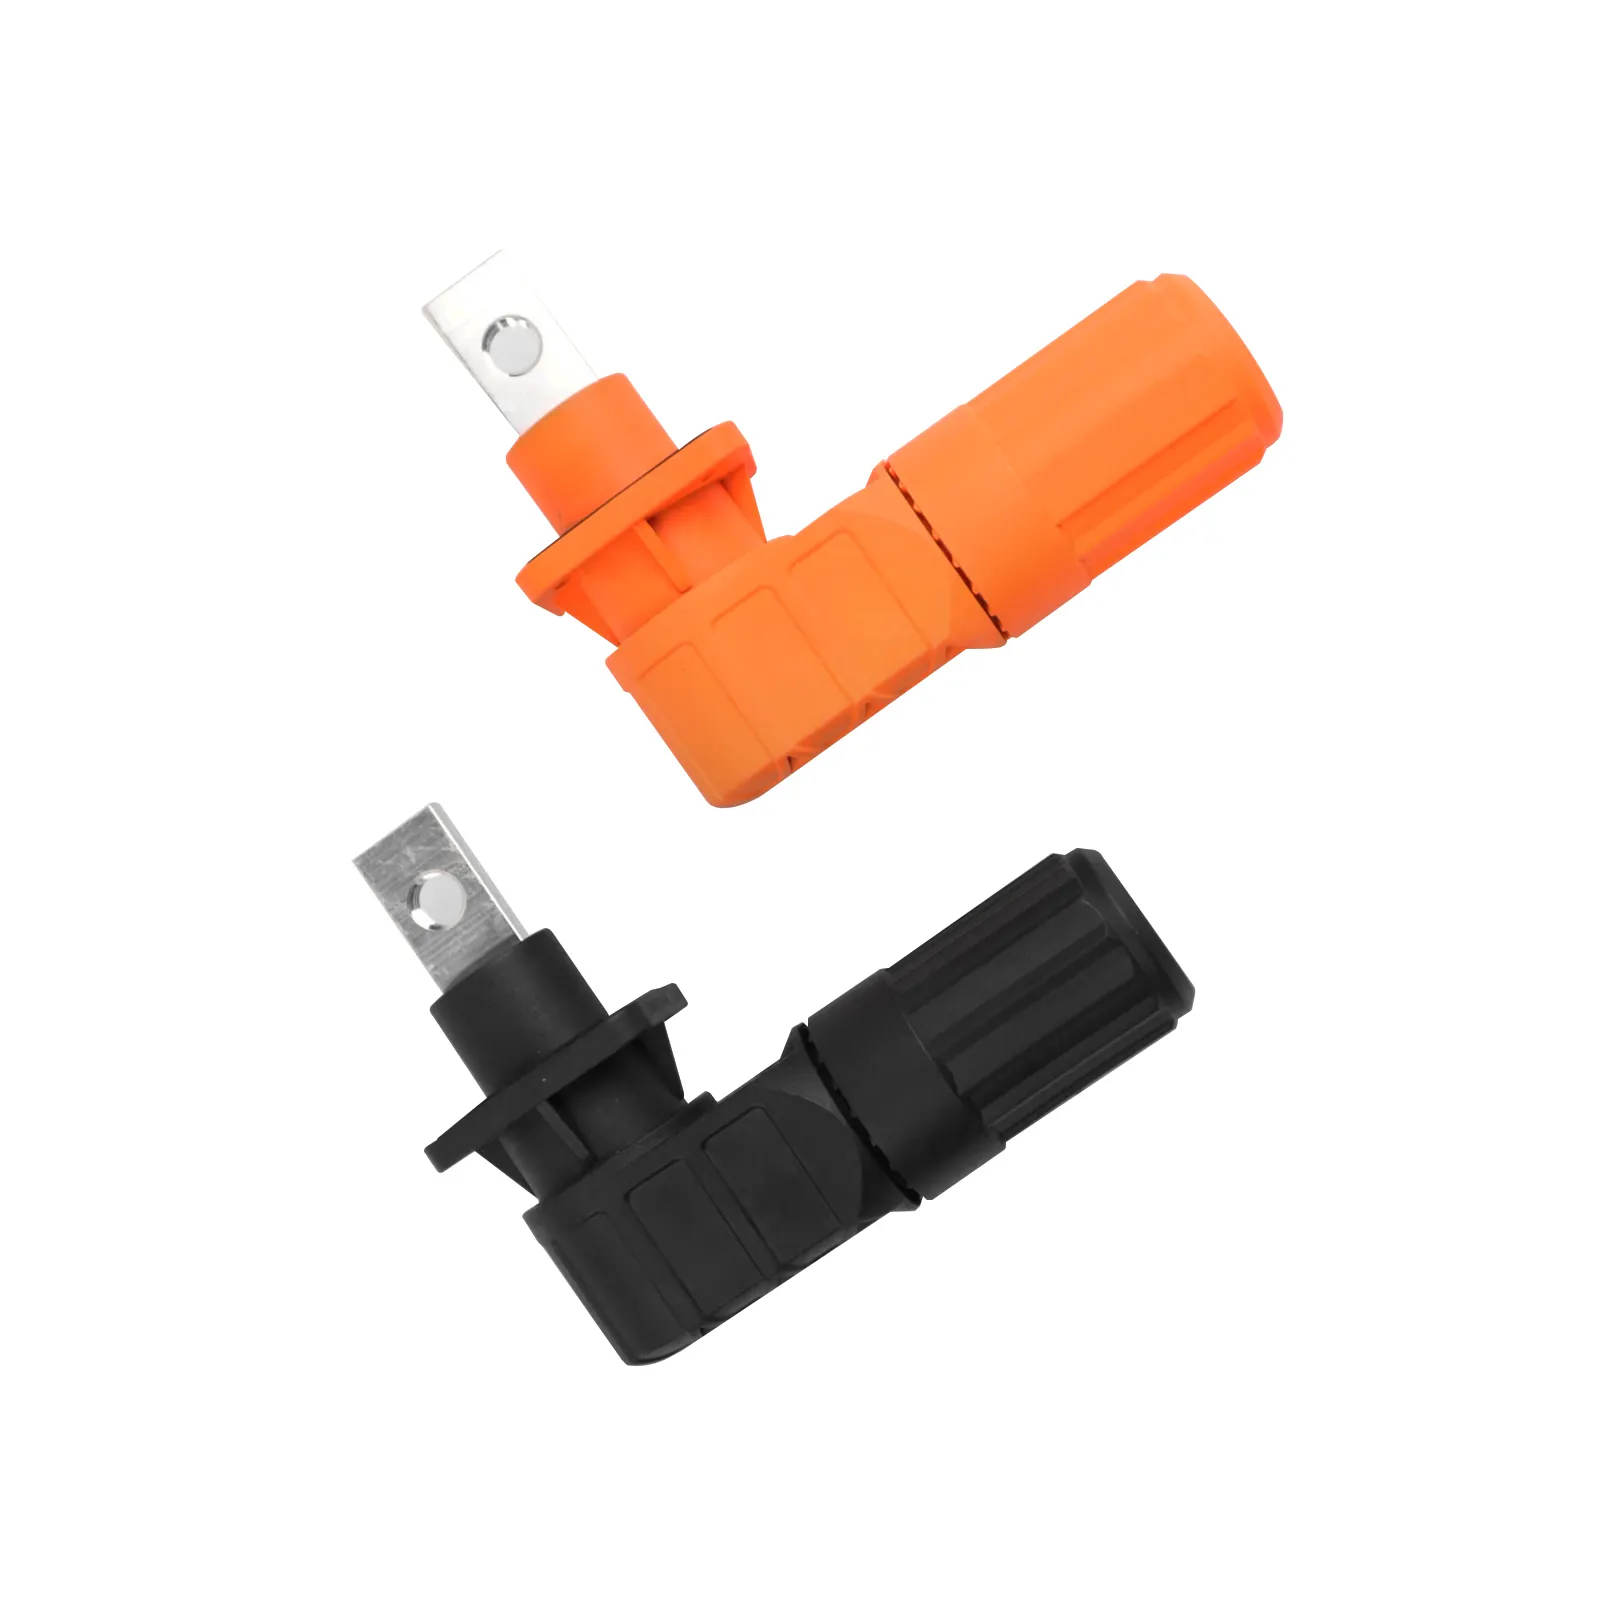 Support One-Stop Service 500a 100a Harness 350a Plug Quick Battery Energy Storage Connector